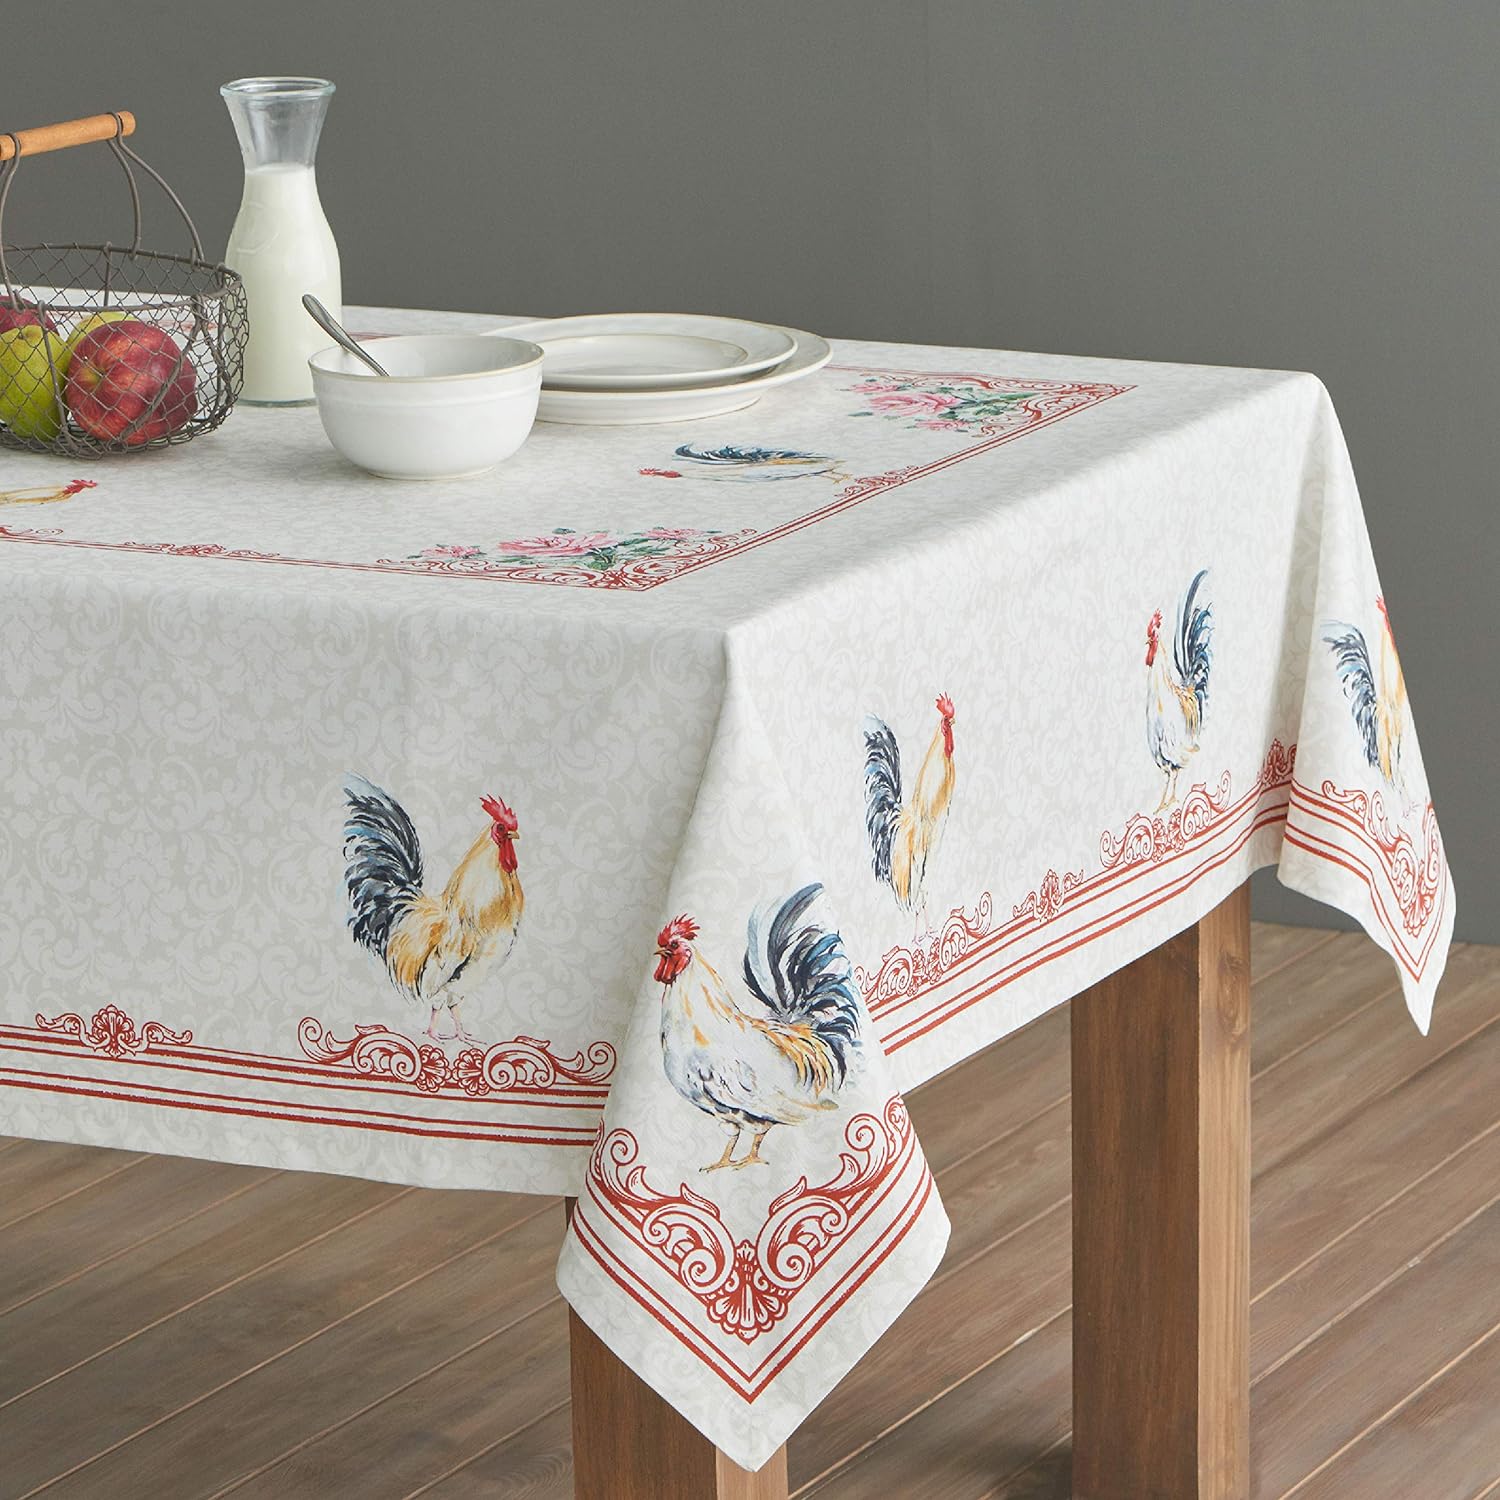 Maison d' Hermine Table Cover 60x90 100% Cotton Decorative Washable  Rectangle Tabletop Tablecloths for Gifts, Kitchen, Party, Wedding,  Restaurant 